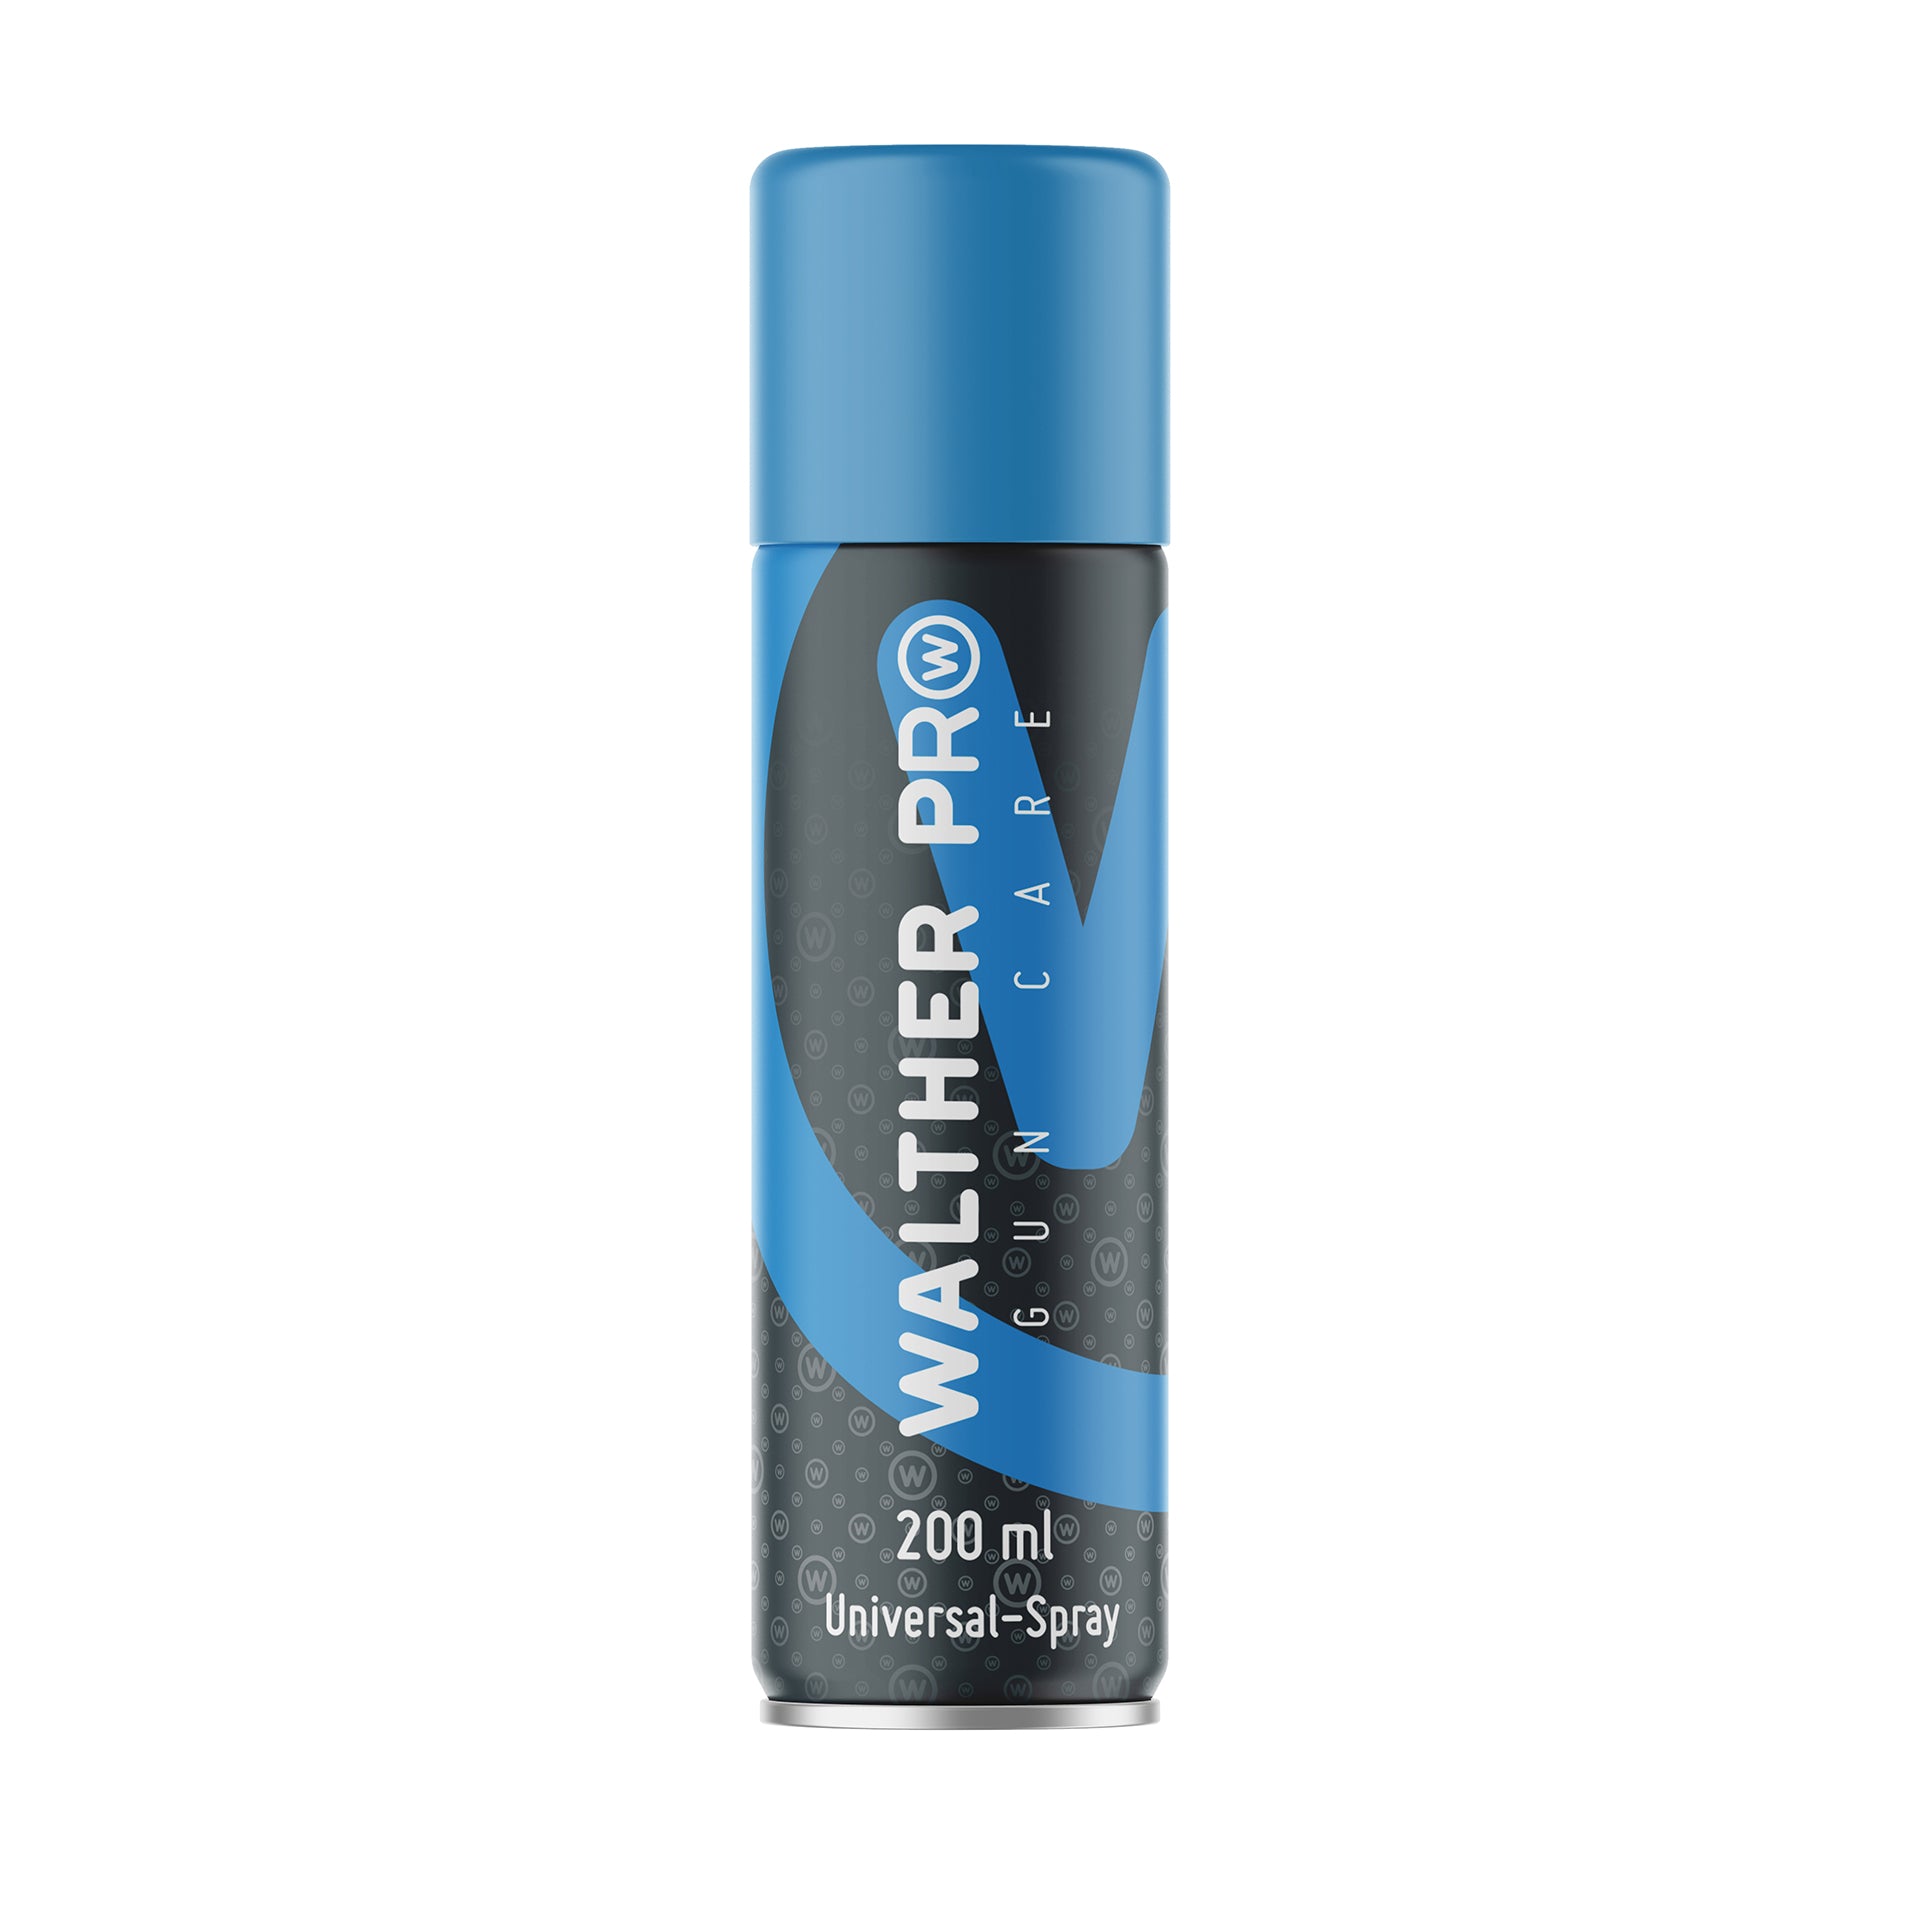 Walther Pro Spray Lubricating and Protective Oil